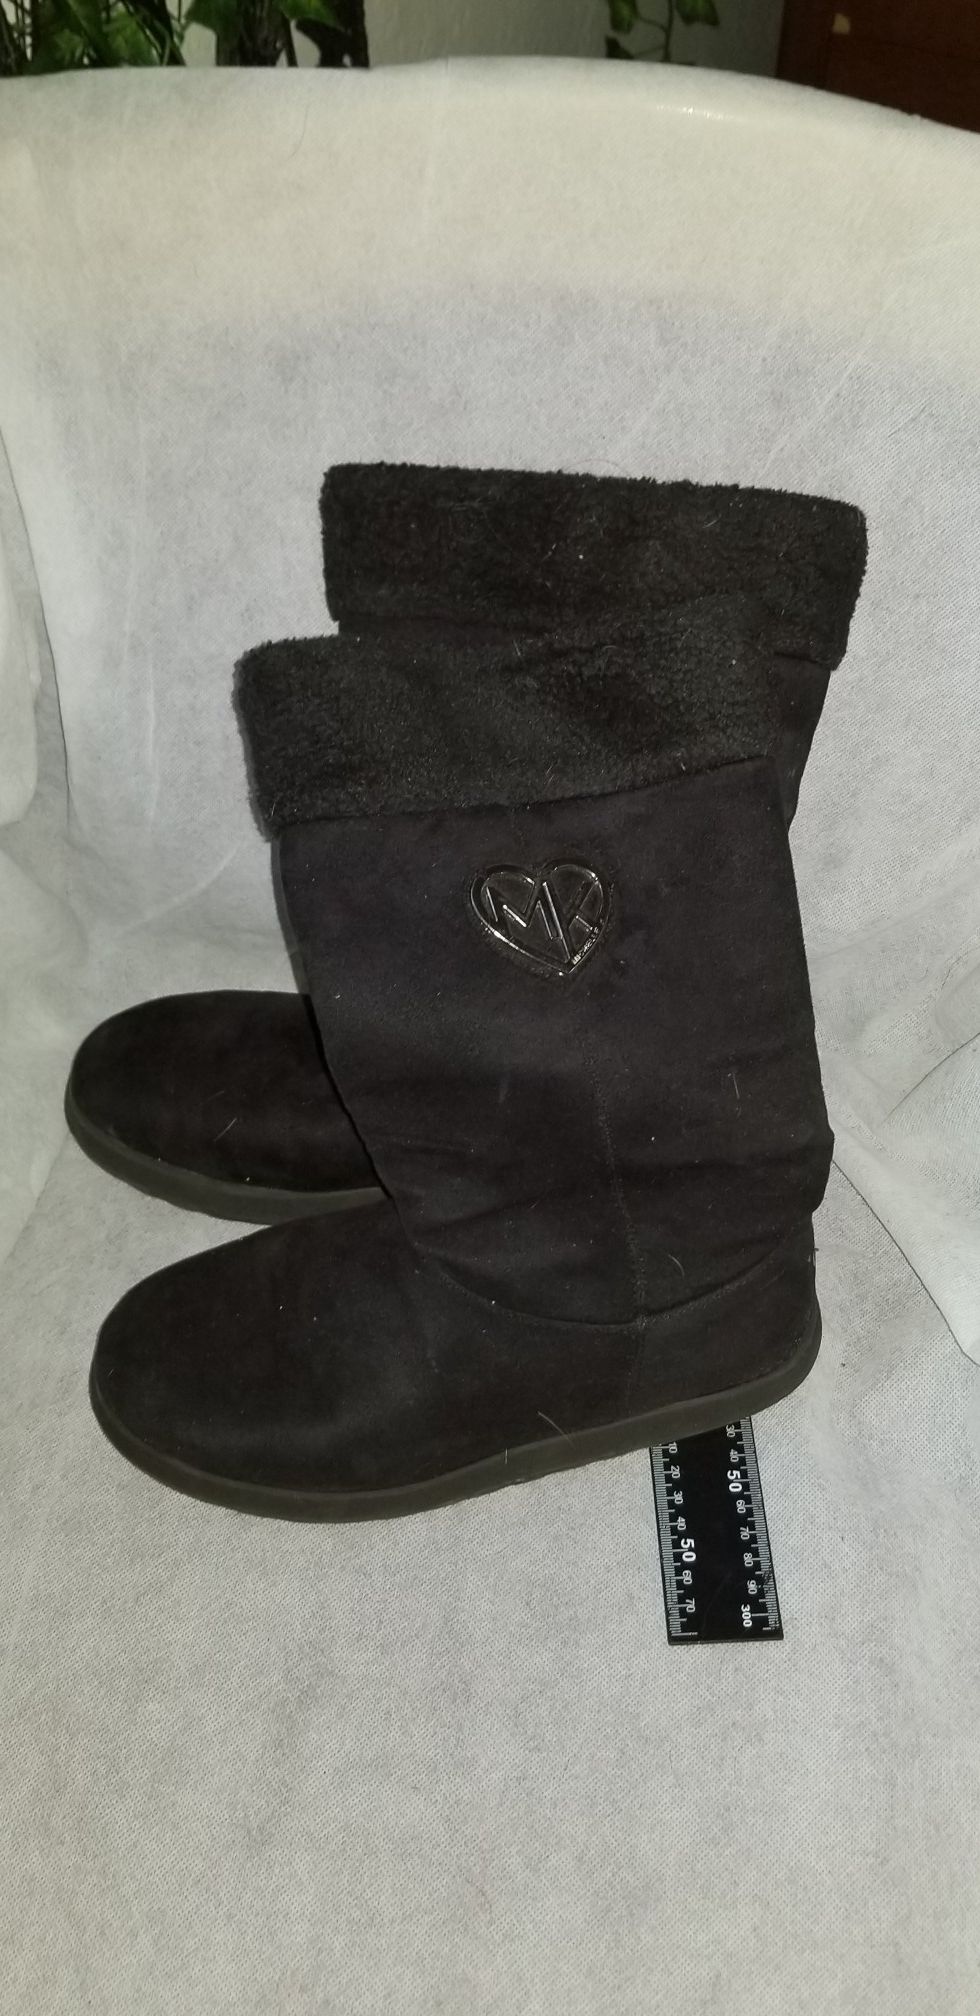 Free! Used Skechers black boots